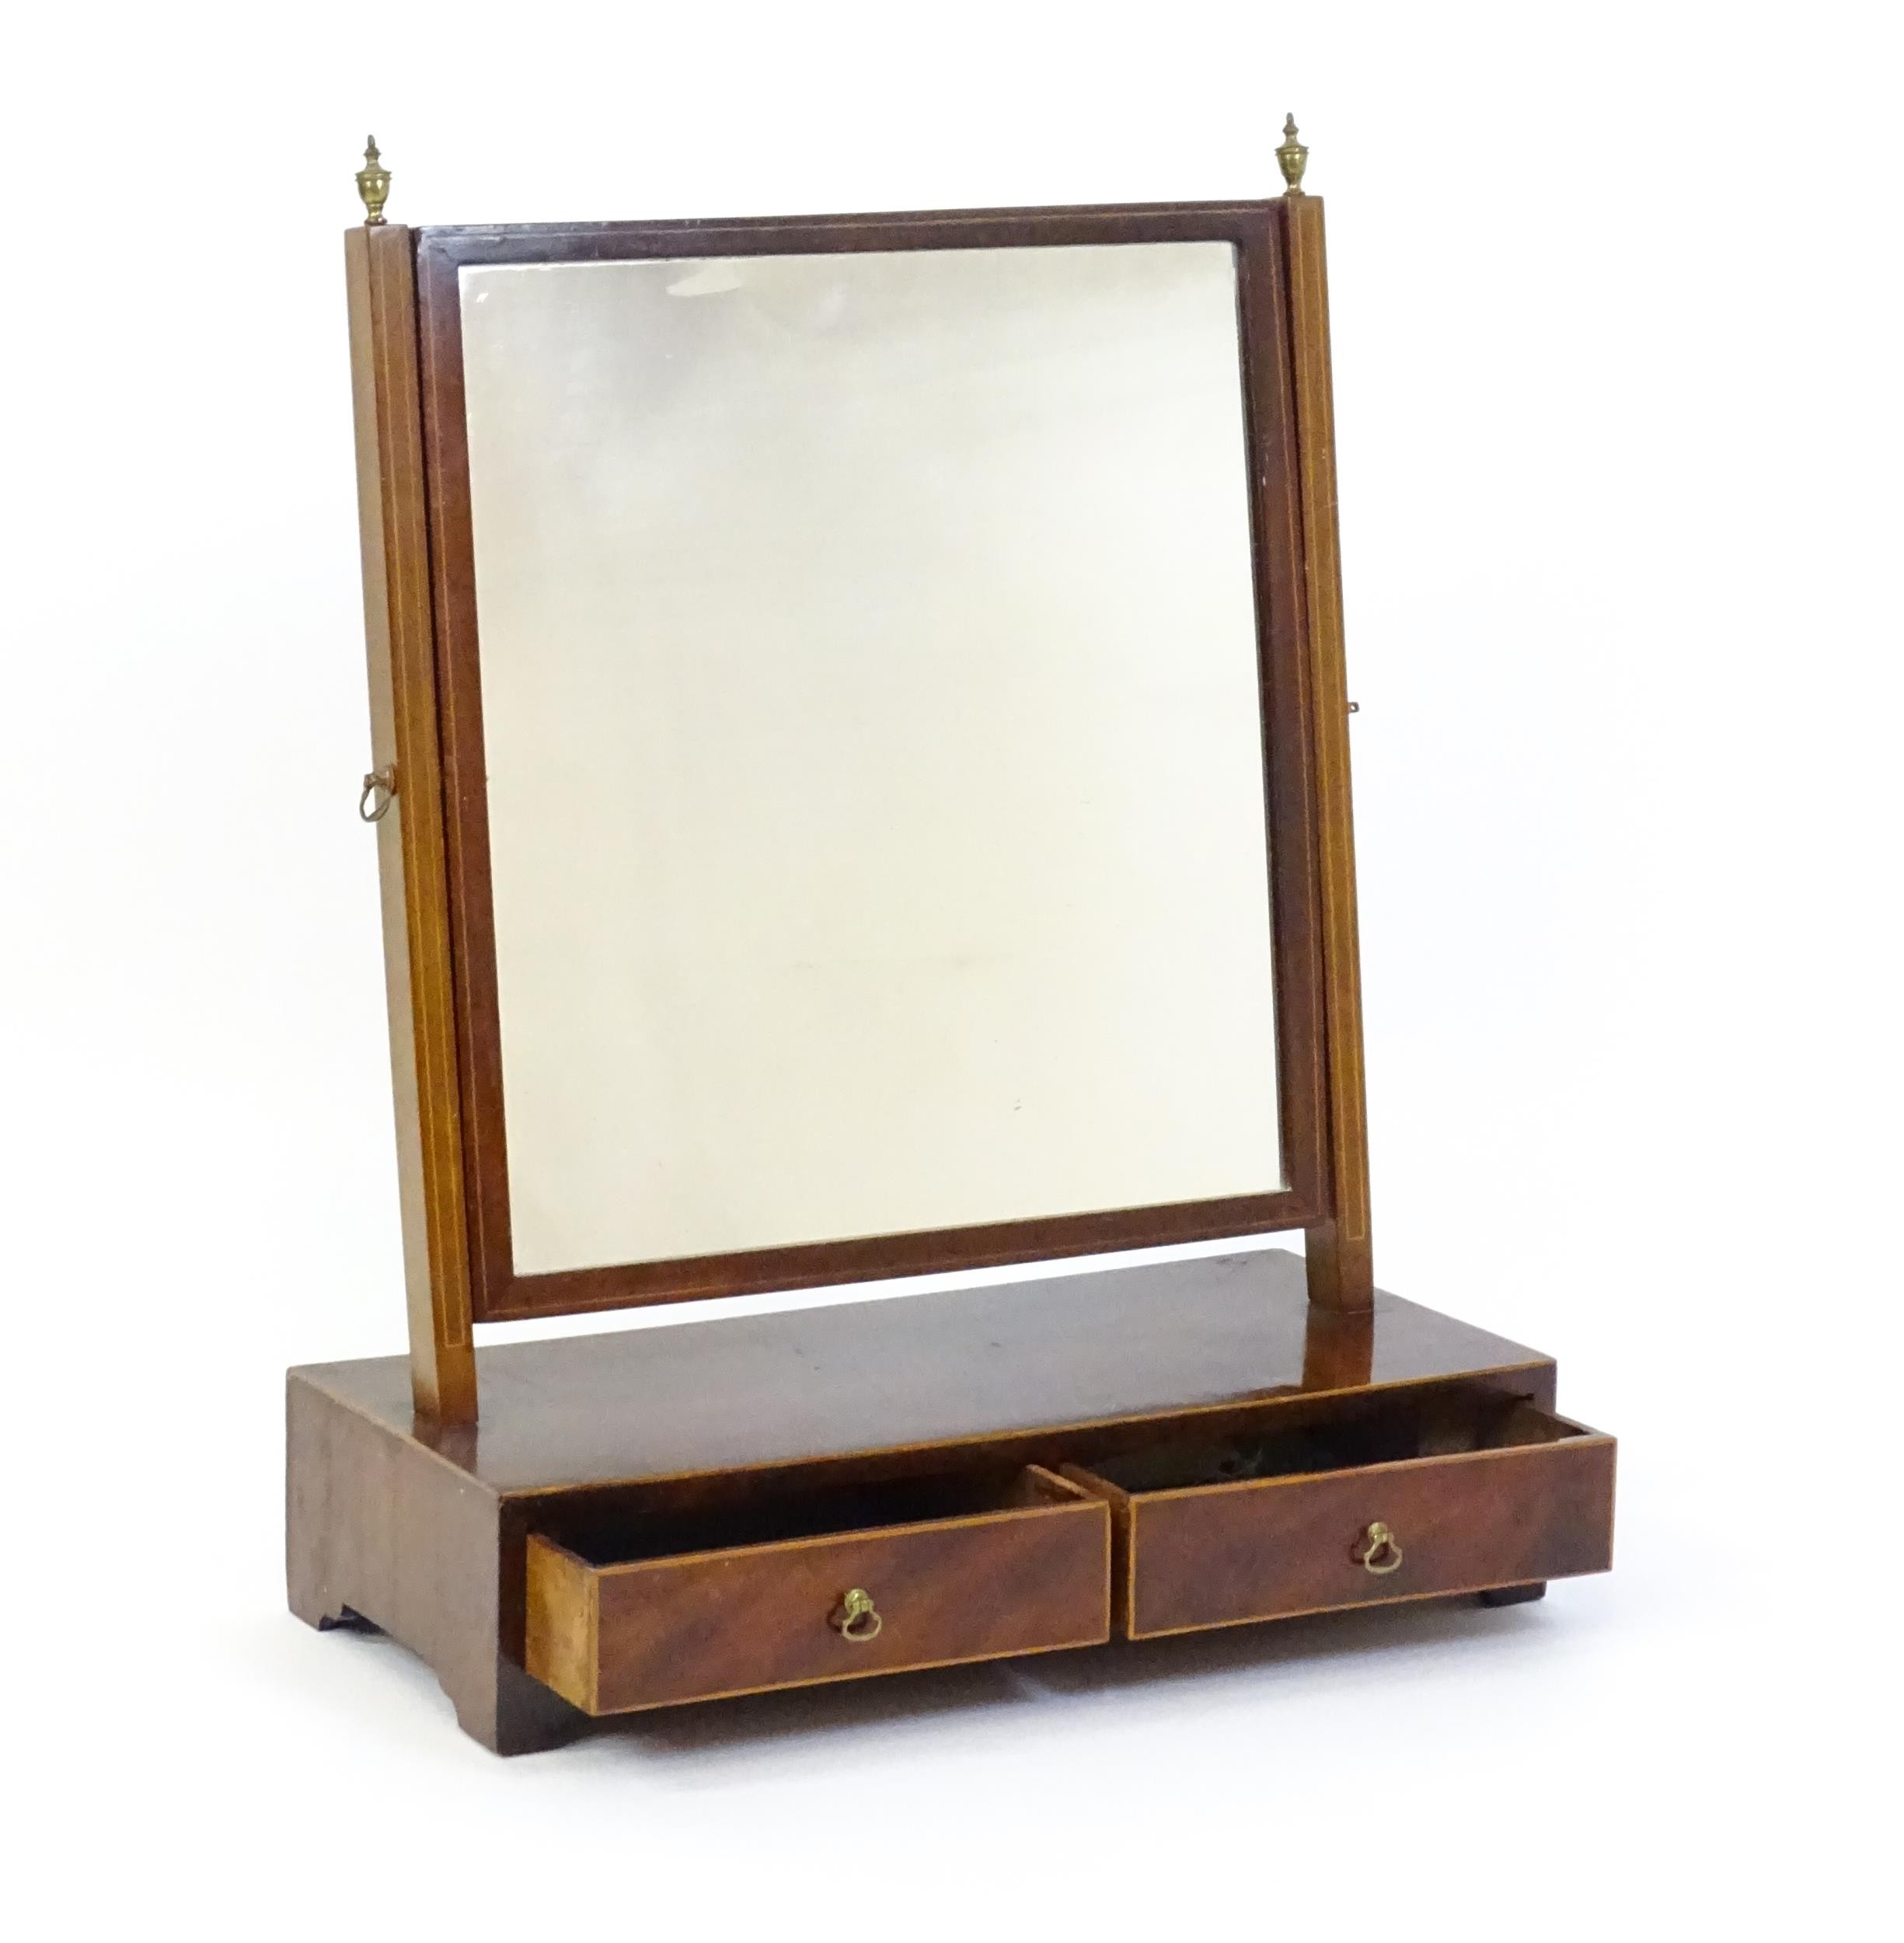 A late 19thC walnut toilet mirror / dressing mirror with satinwood inlay and surmounted by brass - Image 3 of 7